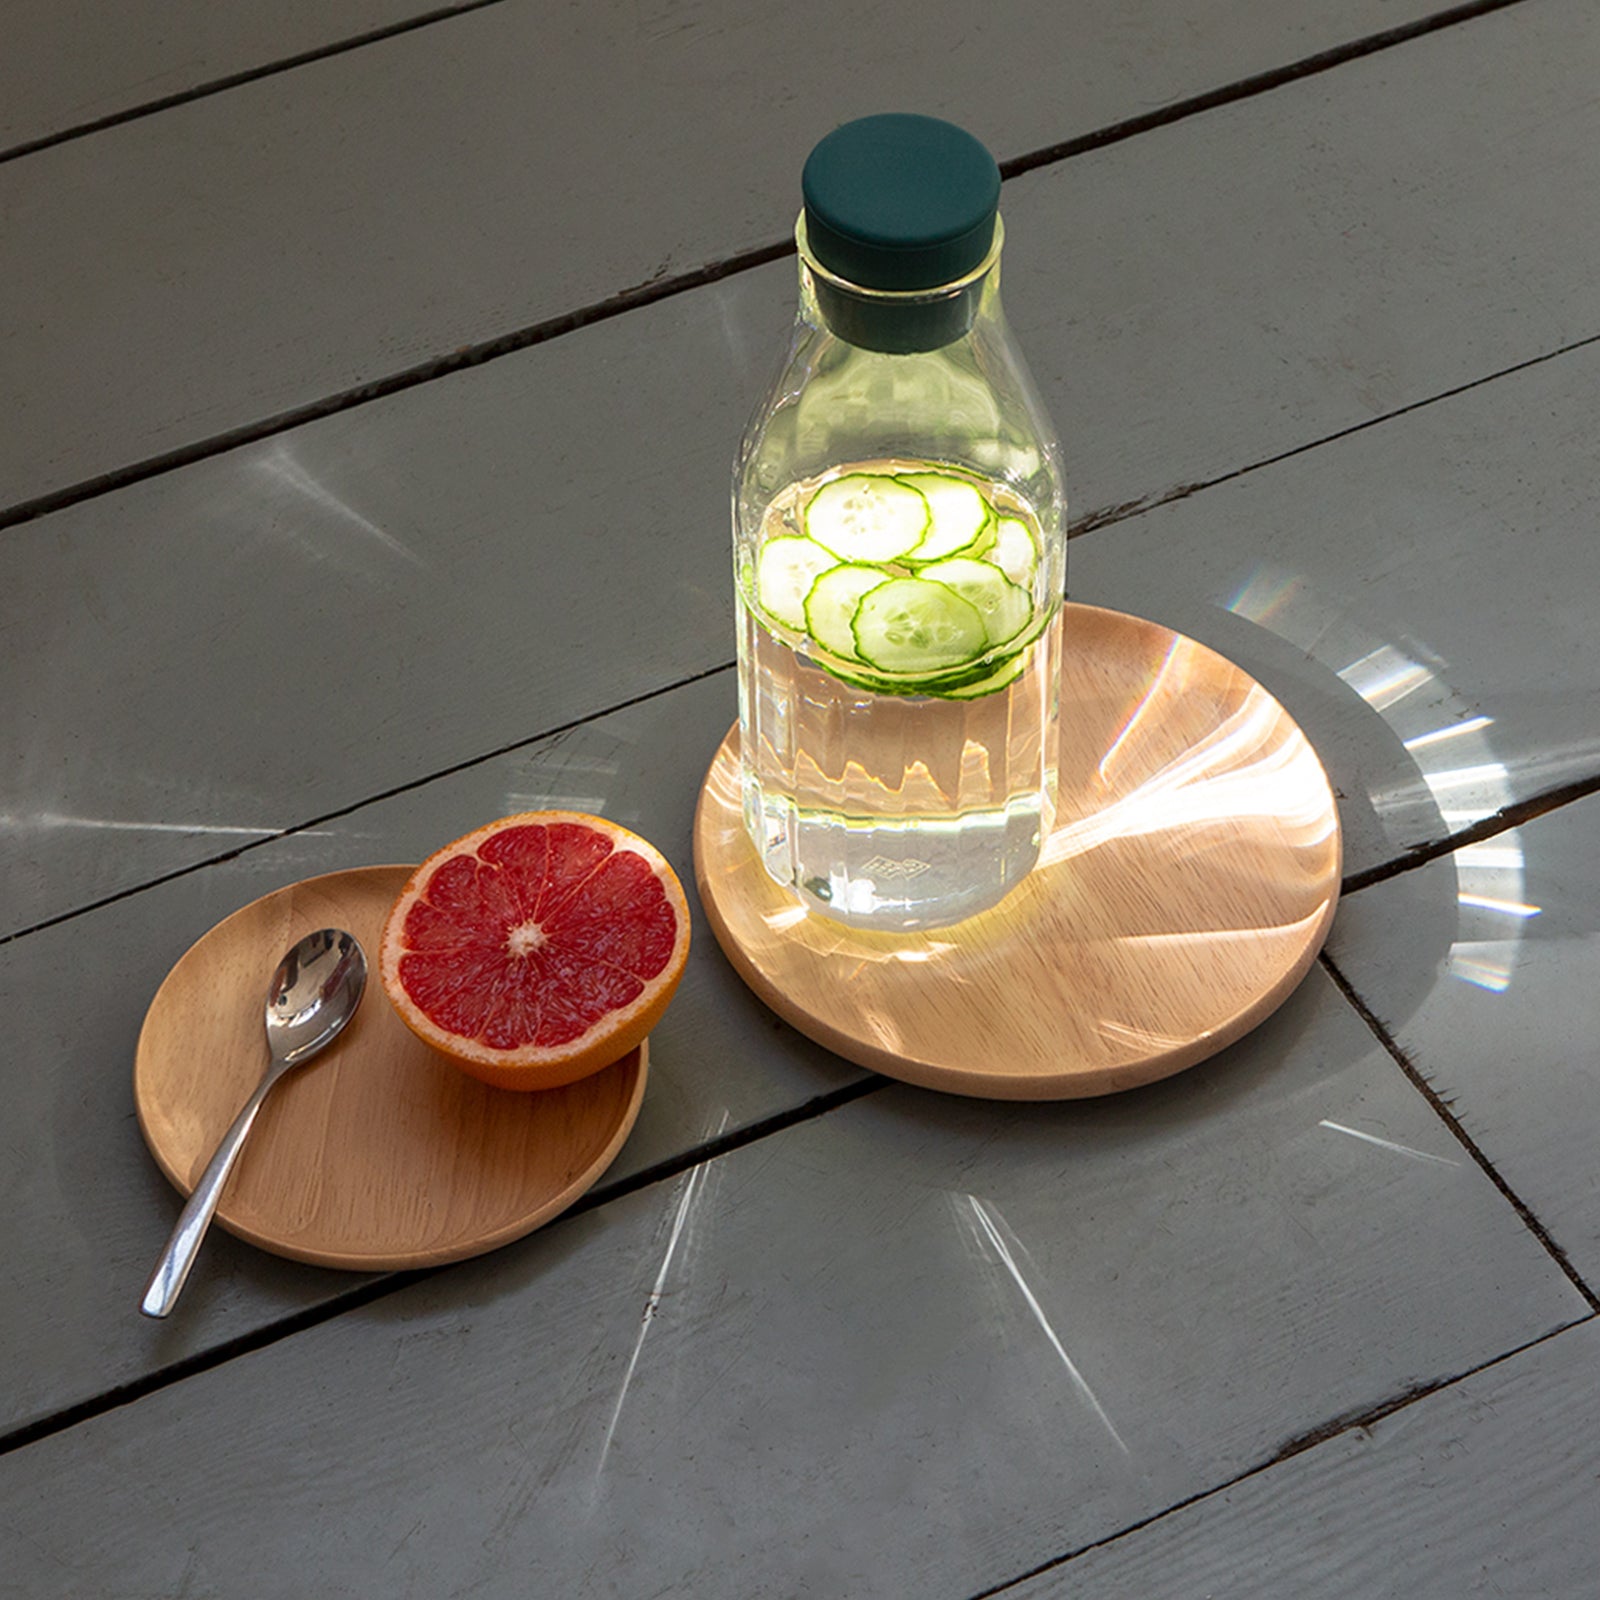 Yod and Co Rivington glass carafes design by Blond design studio